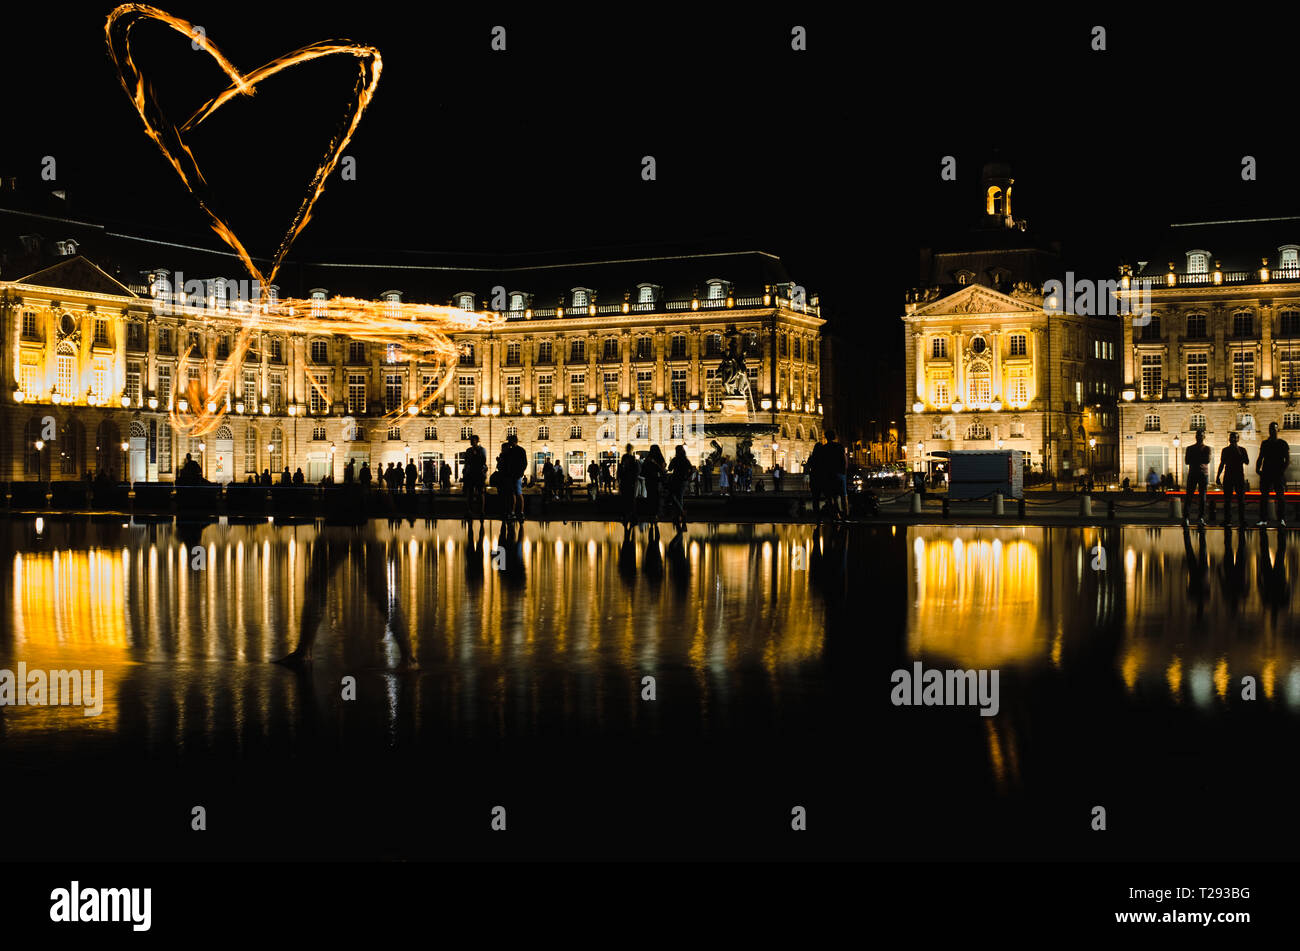 Bordeaux, France - September 15, 2018 : Fire juggler draws a heart of fire at the water mirror in front of place de la bourse illuminated at night Stock Photo